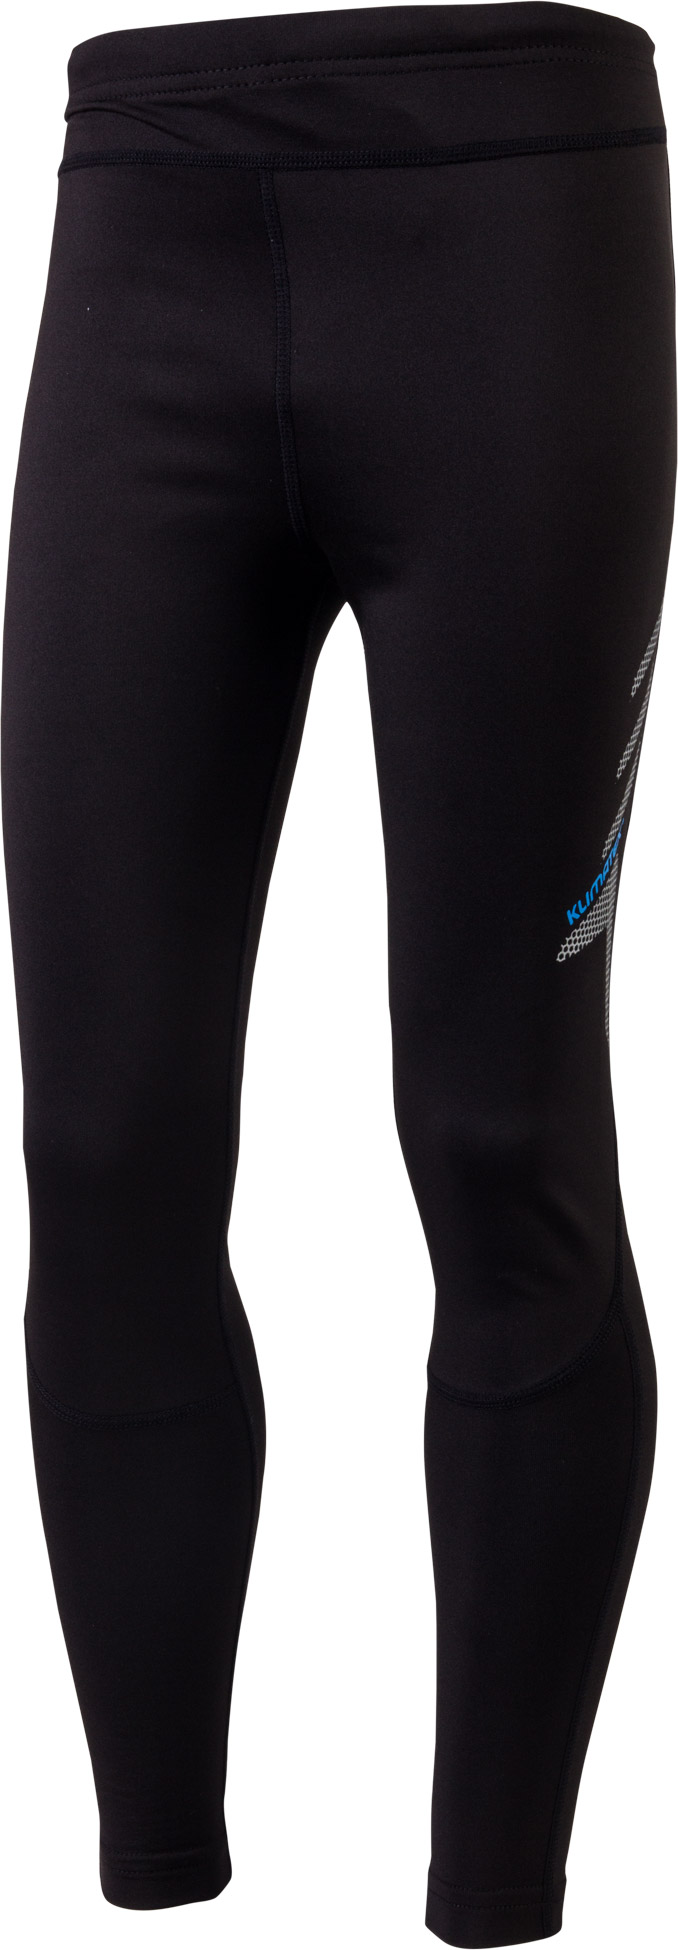 Kids’ tights with a windproof membrane